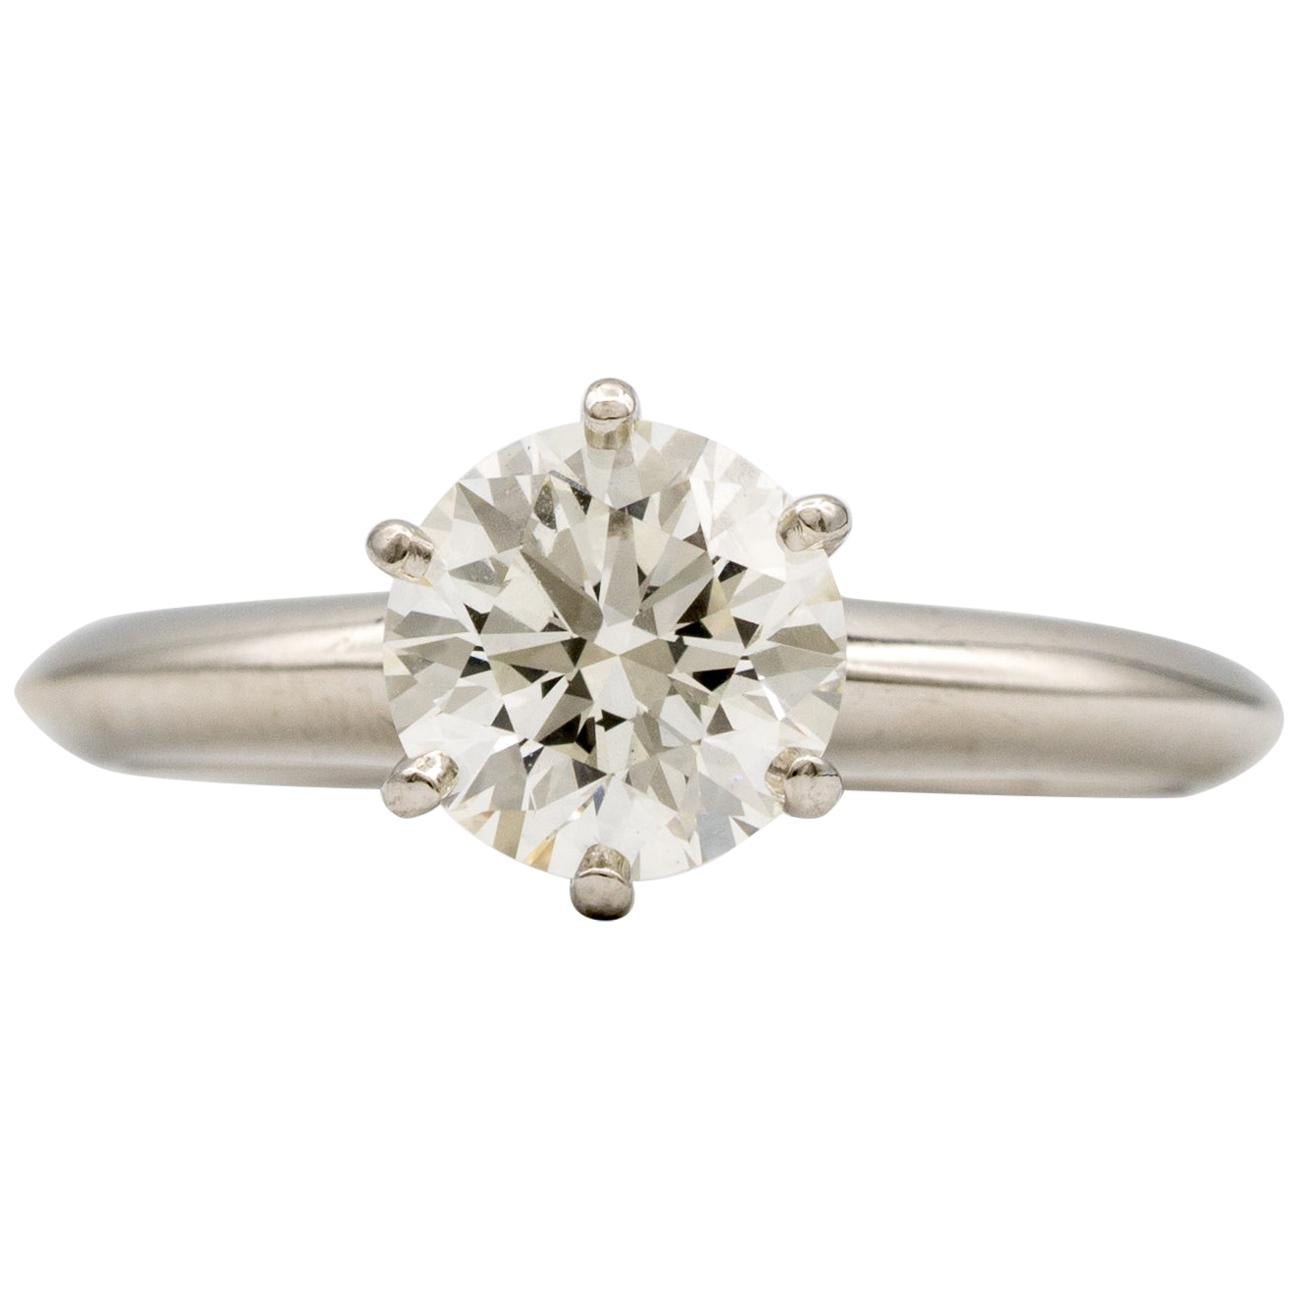 Tiffany & Co. Engagement Ring with 1.28 Carat Centre in Platinum ($18, 200)